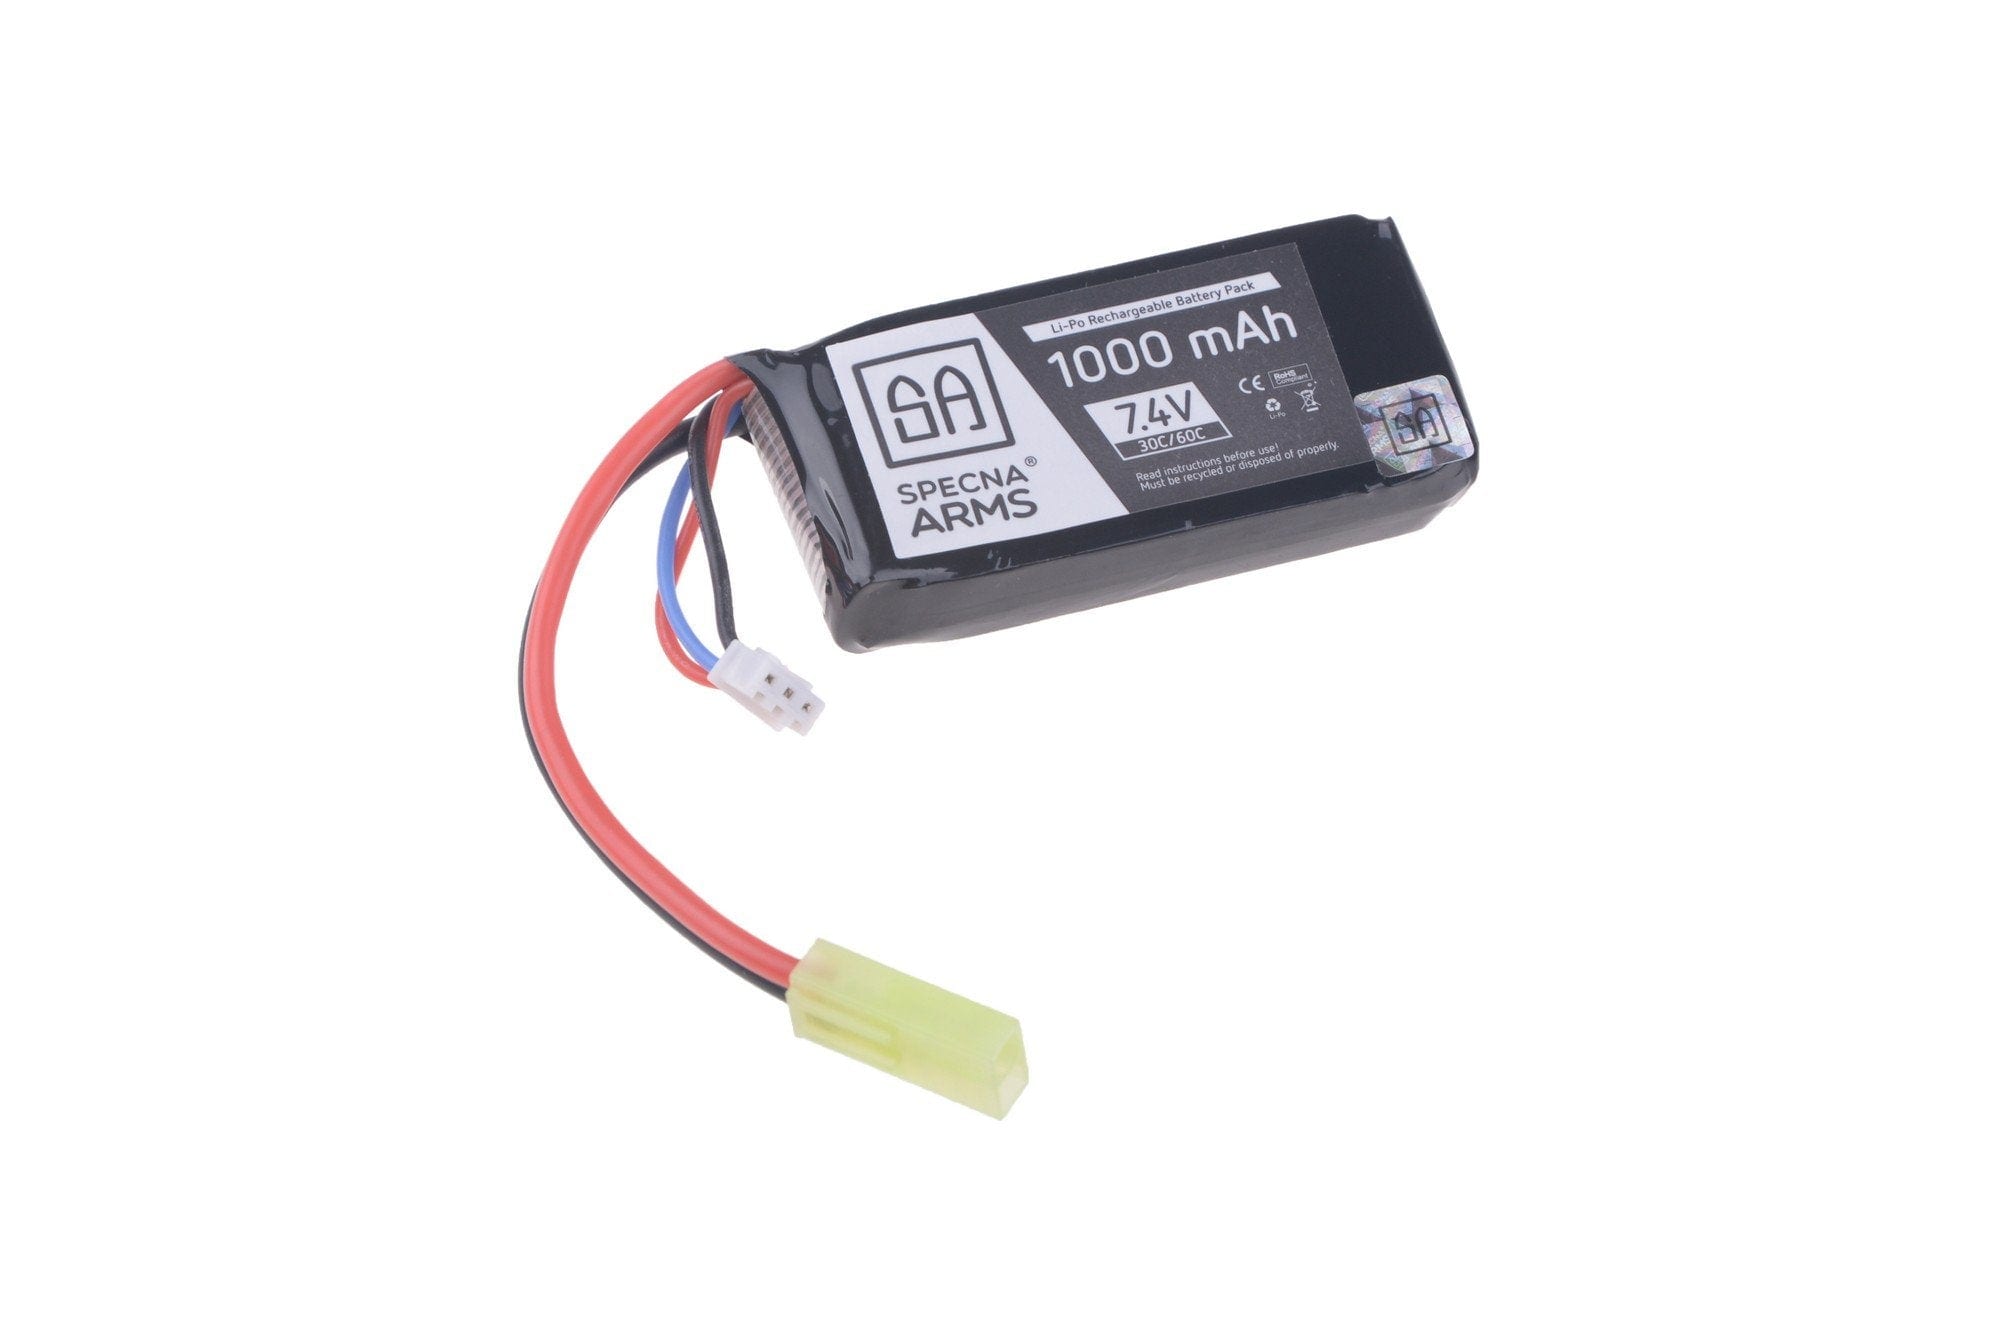 LiPo battery 7.4V 1000mAh 30 / 60C (PEQ) by Specna Arms on Airsoft Mania Europe